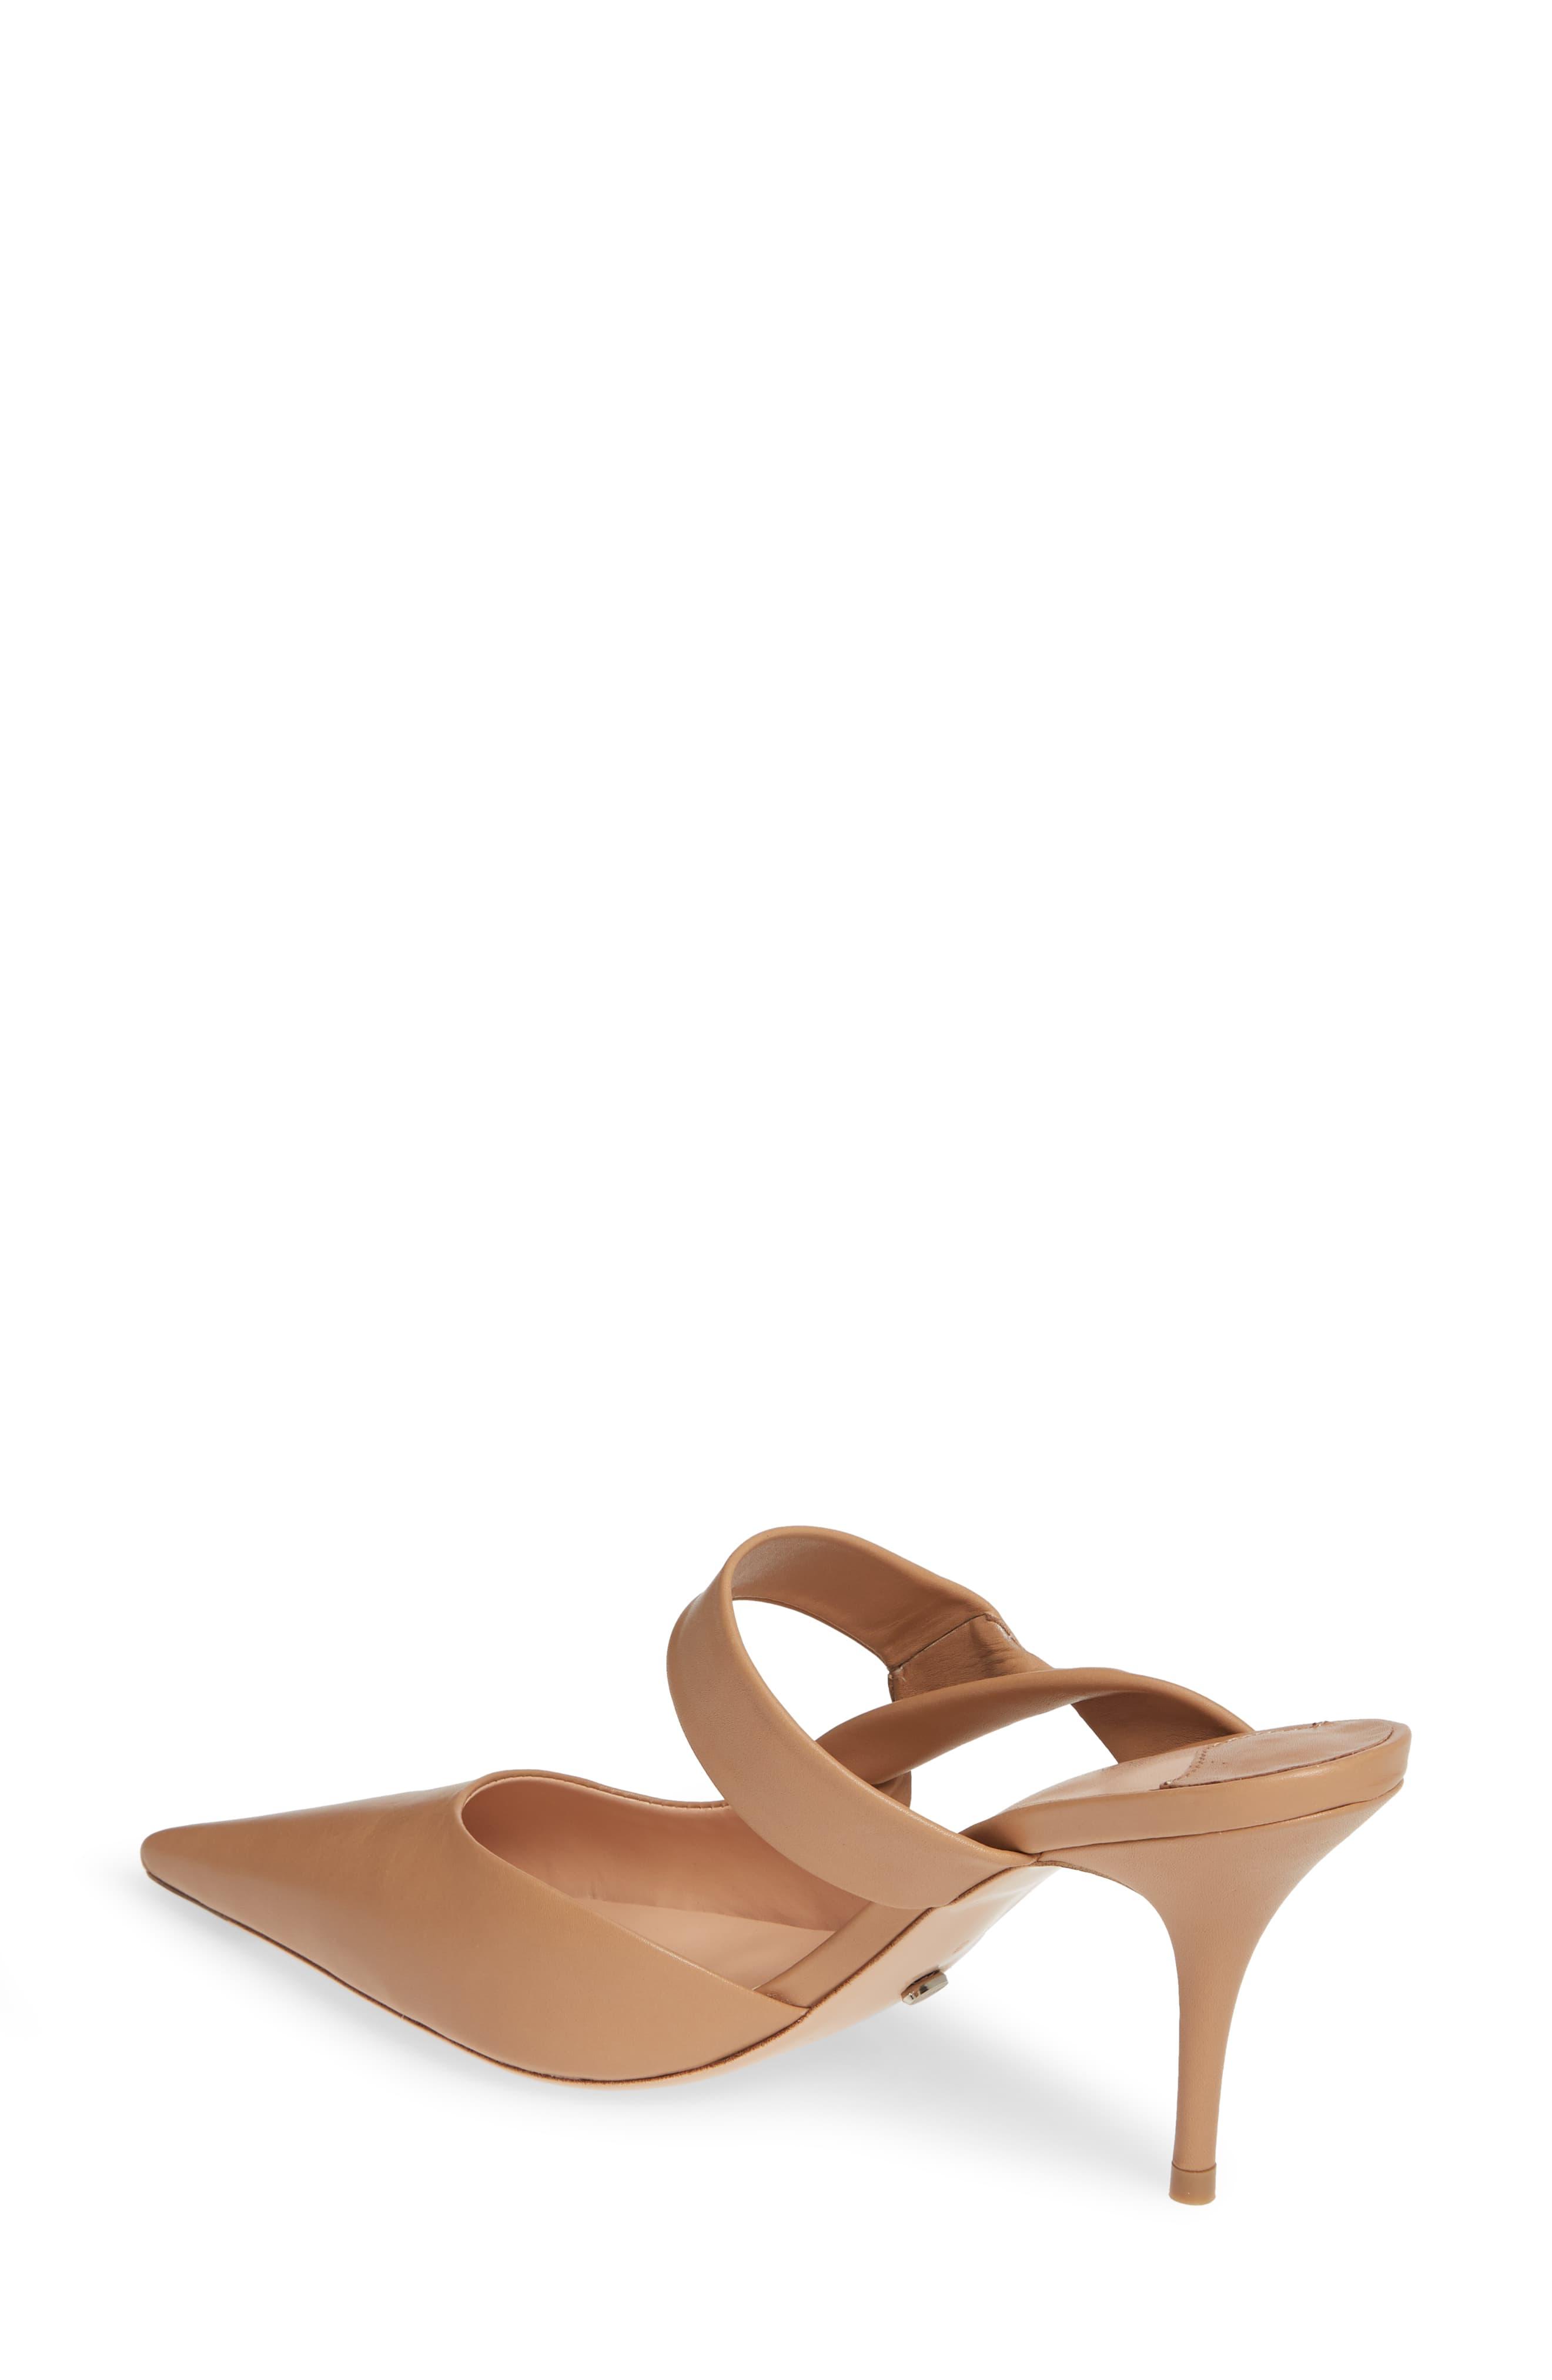 Tony Bianco Hank Strappy Mule in Natural - Lyst